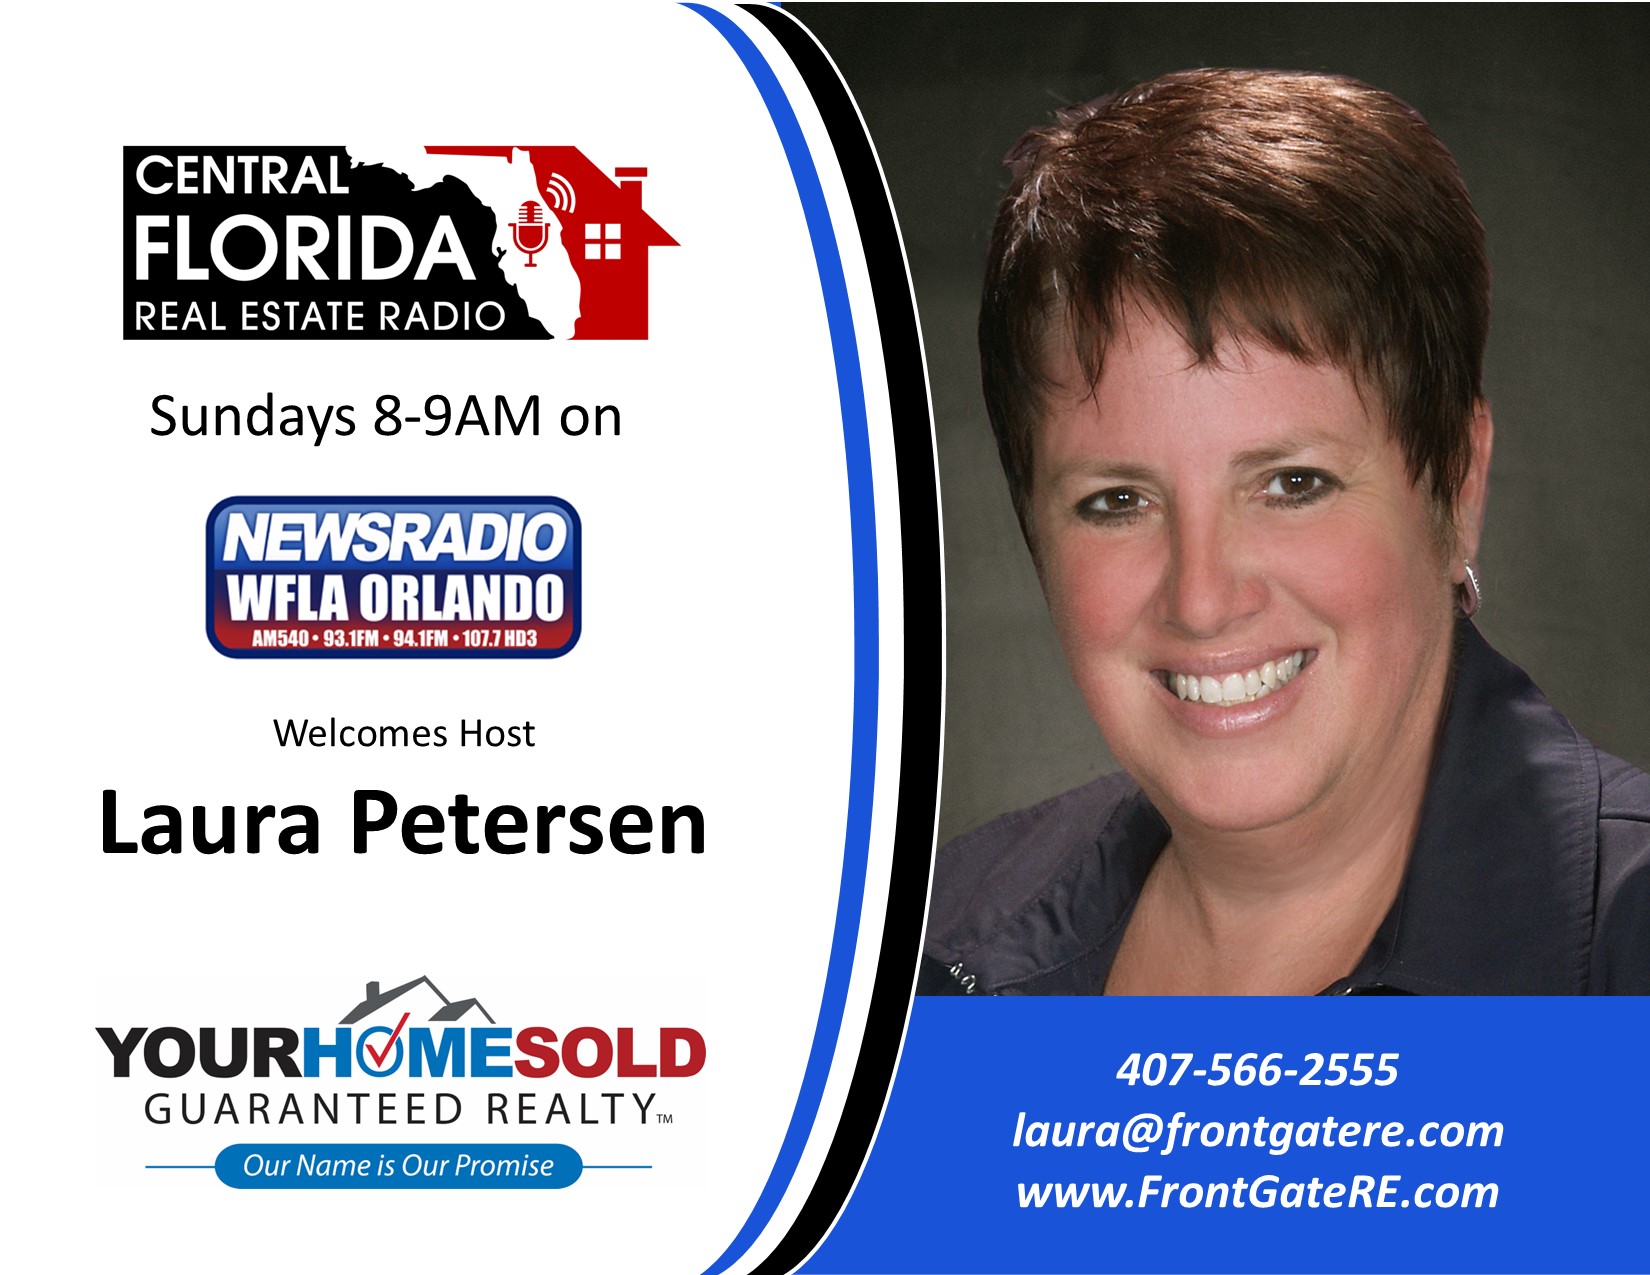 How to Sell Your Home Central Florida Real Estate Podcast 08-07-22 with Laura Petersen